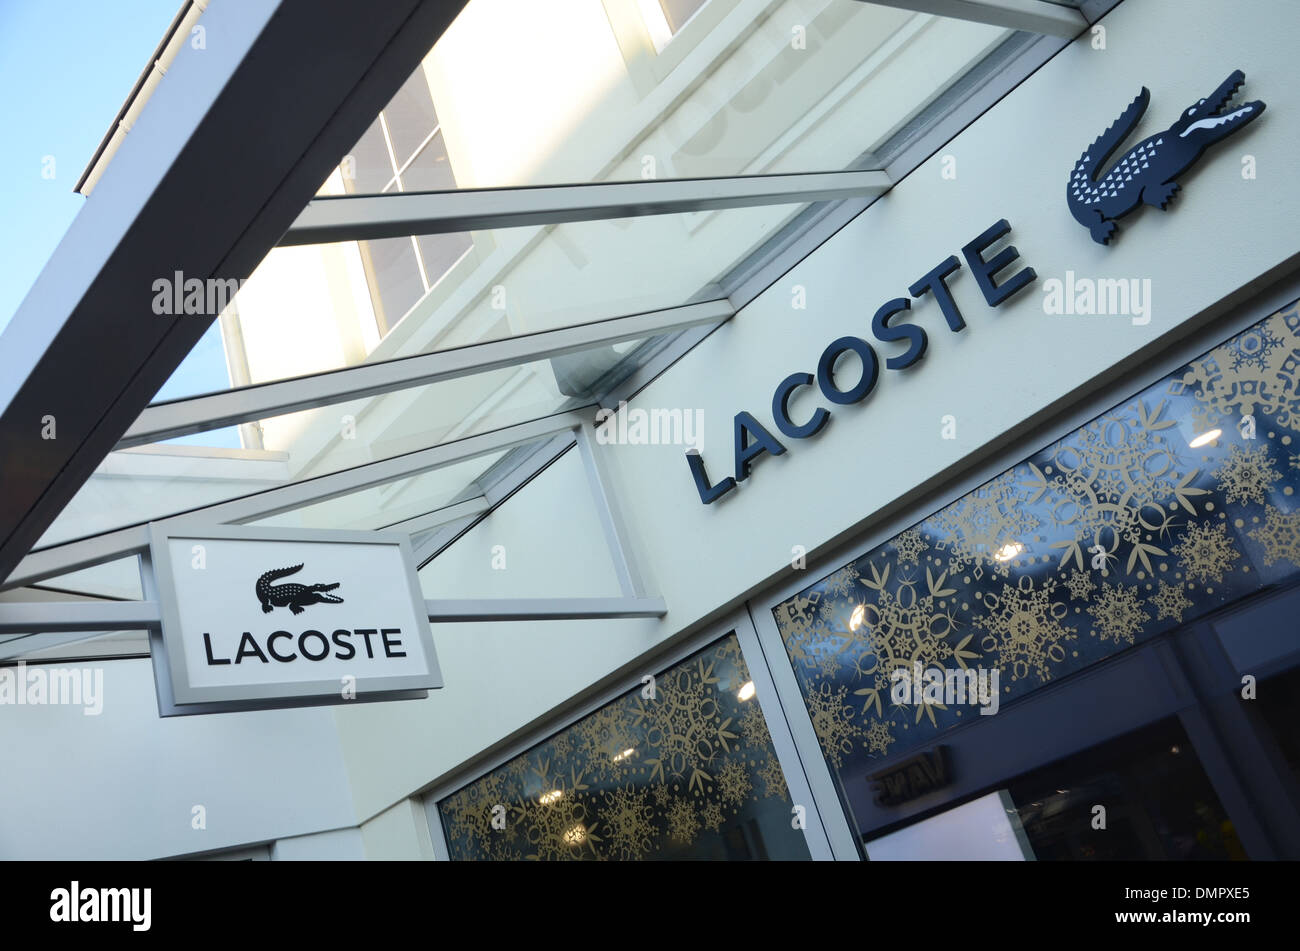 Lacoste Outlet Shop High Resolution Stock Photography and Images - Alamy